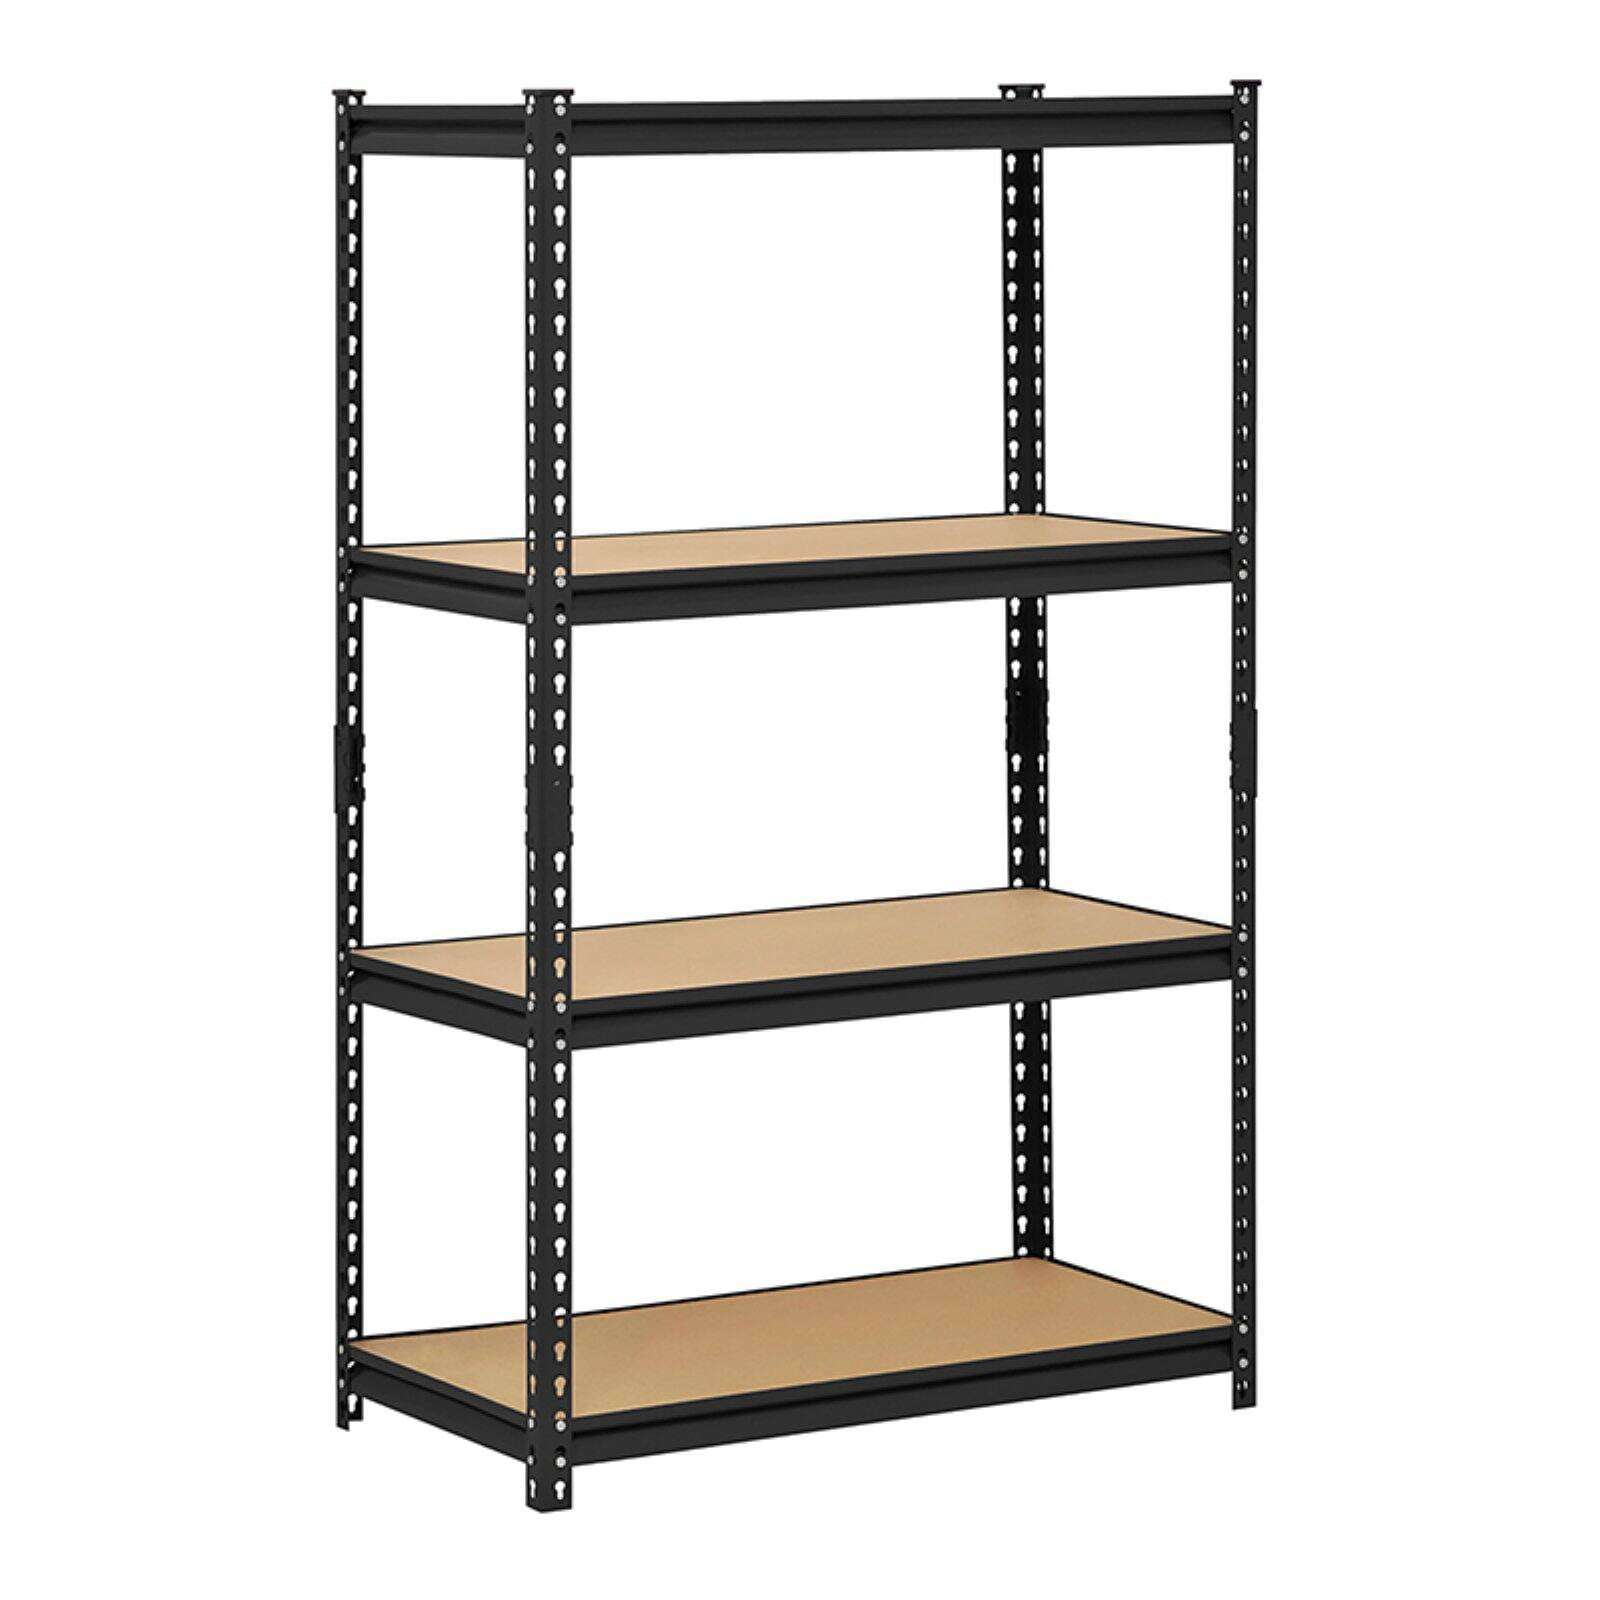 Muscle Rack Black 48 W X 24 D 72 H 5, Muscle Rack Shelving Assembly Instructions